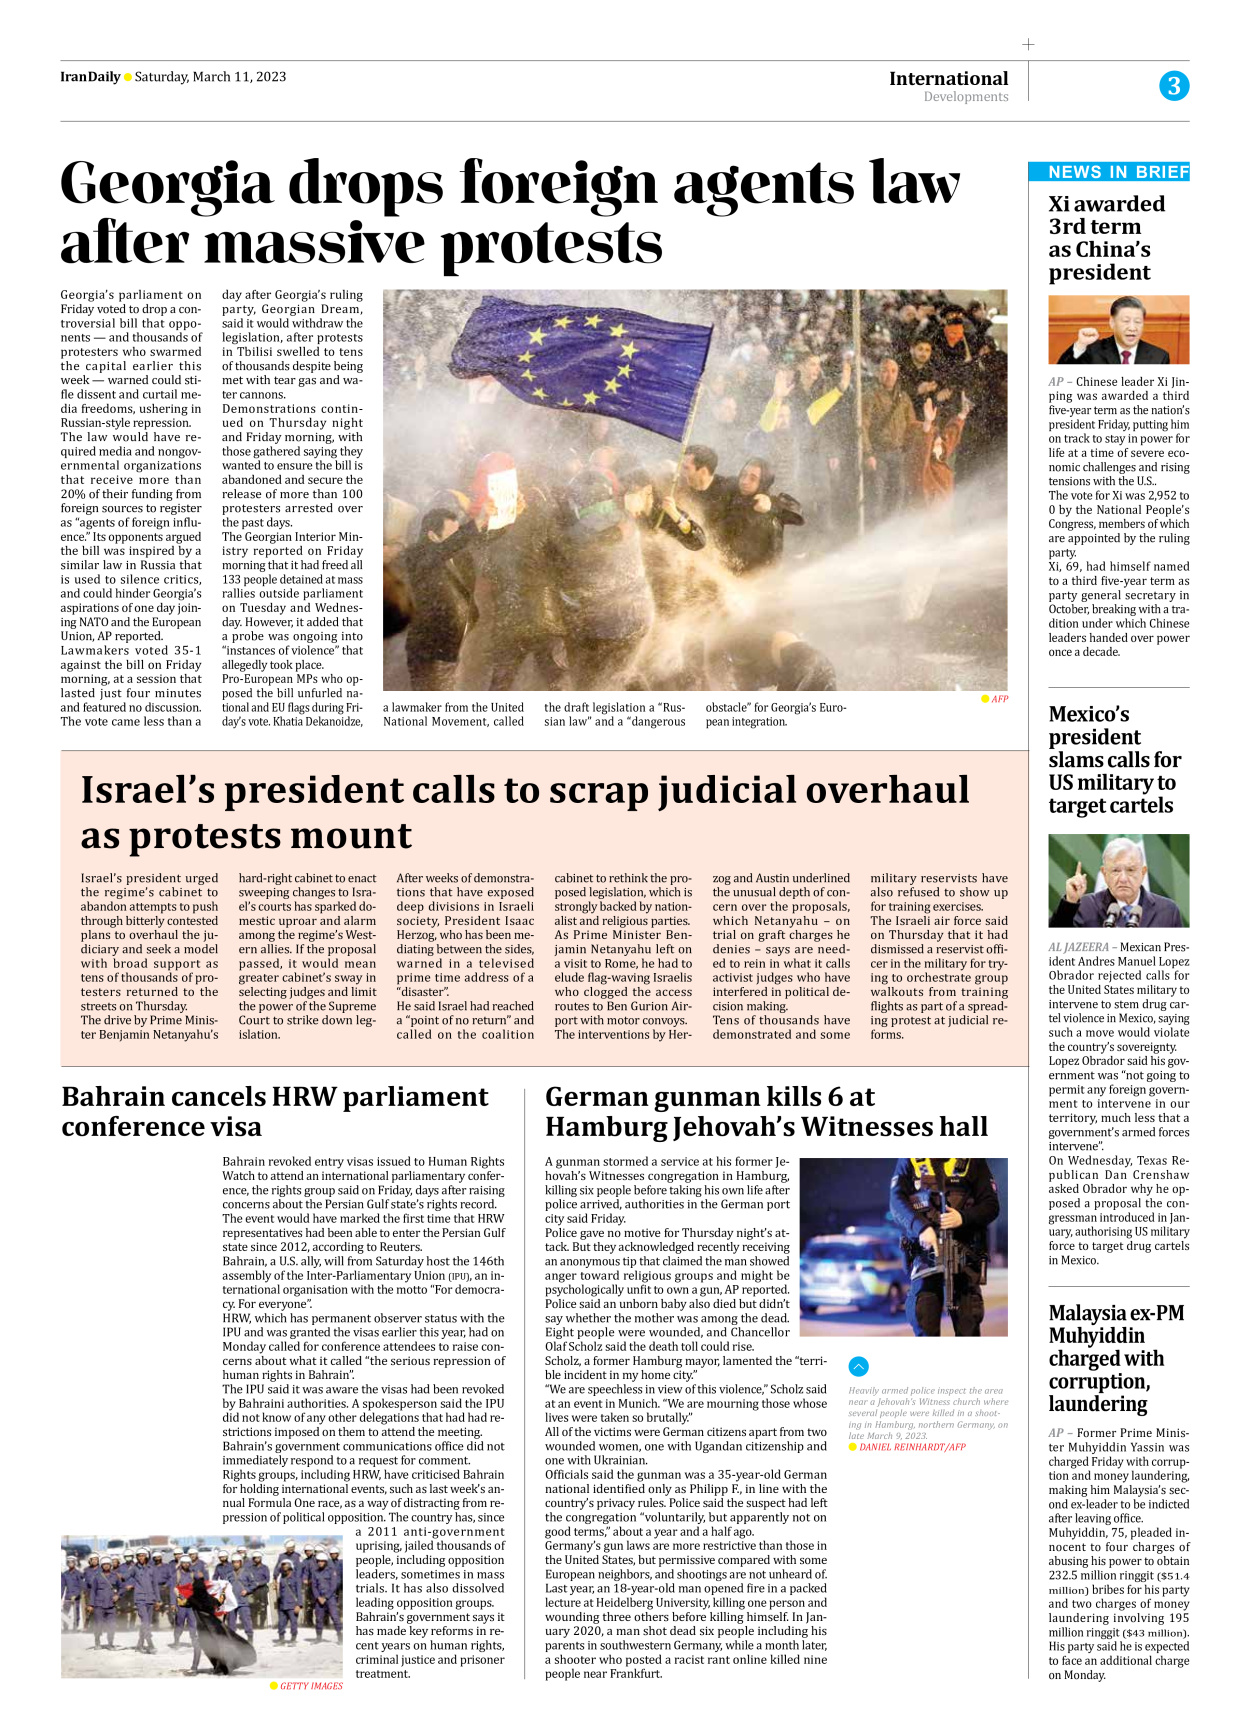 Iran Daily - Number Seven Thousand Two Hundred and Fifty Four - 11 March 2023 - Page 3